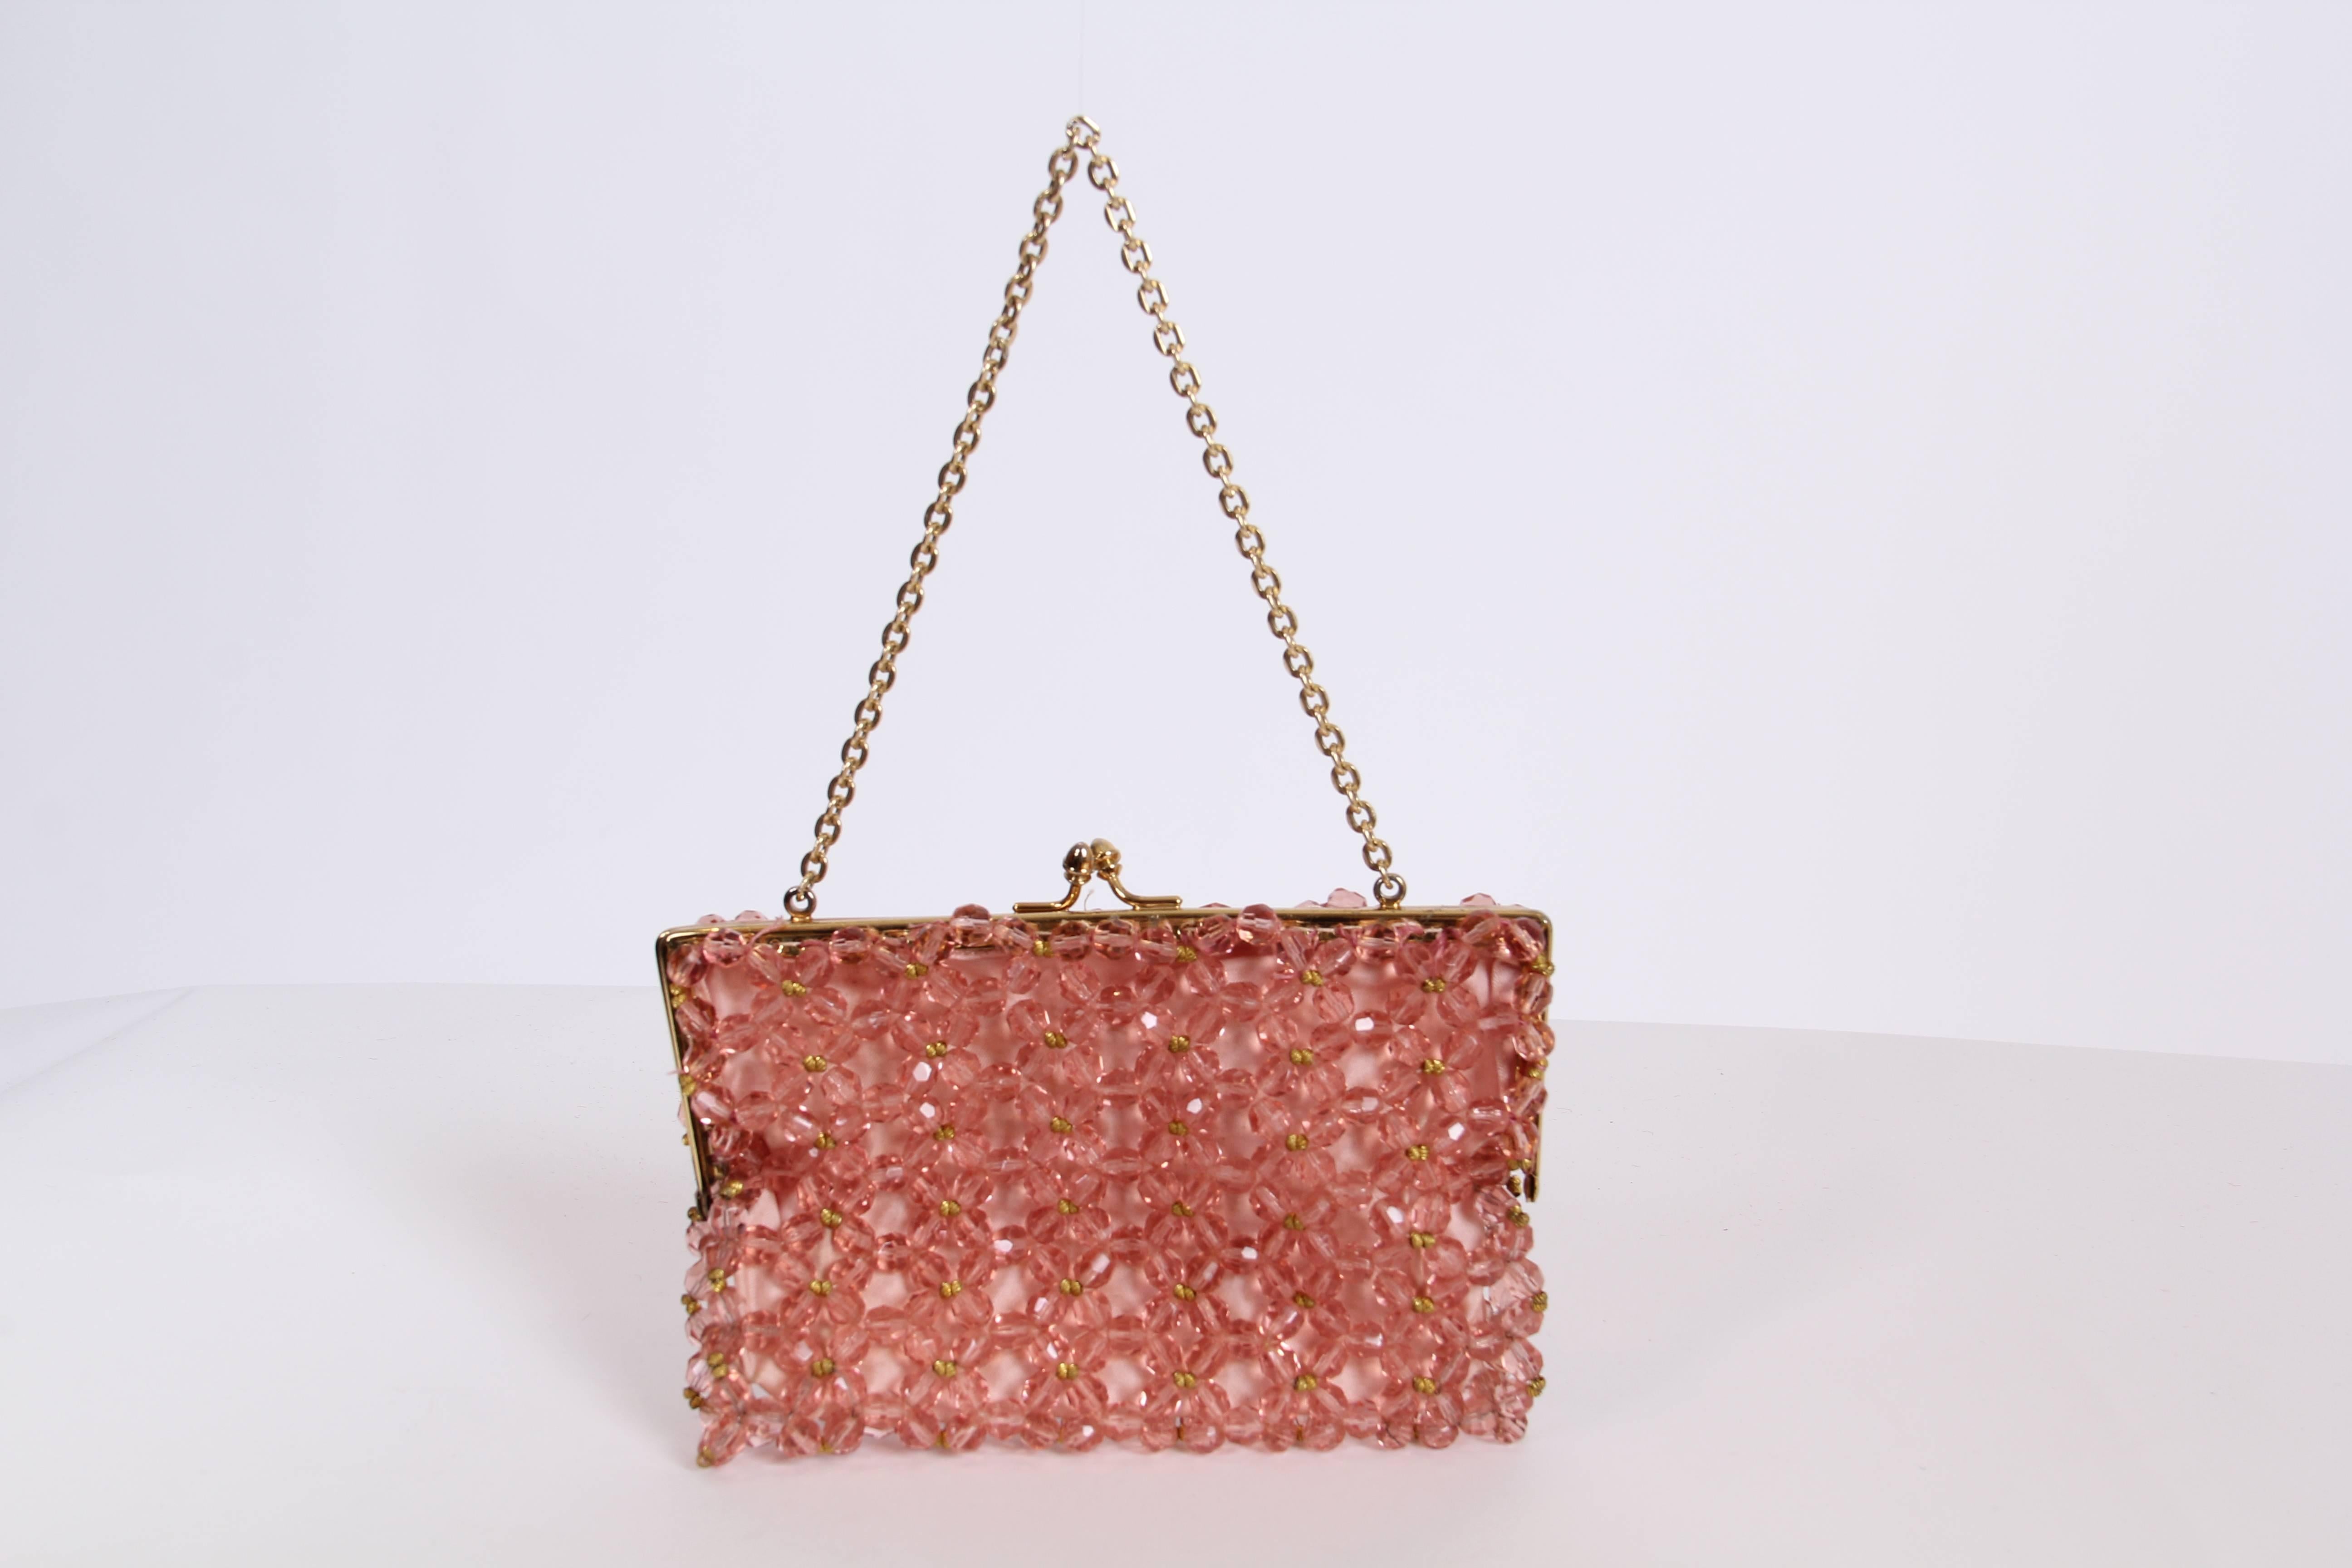 1960s Crystal Clutch from Saks.